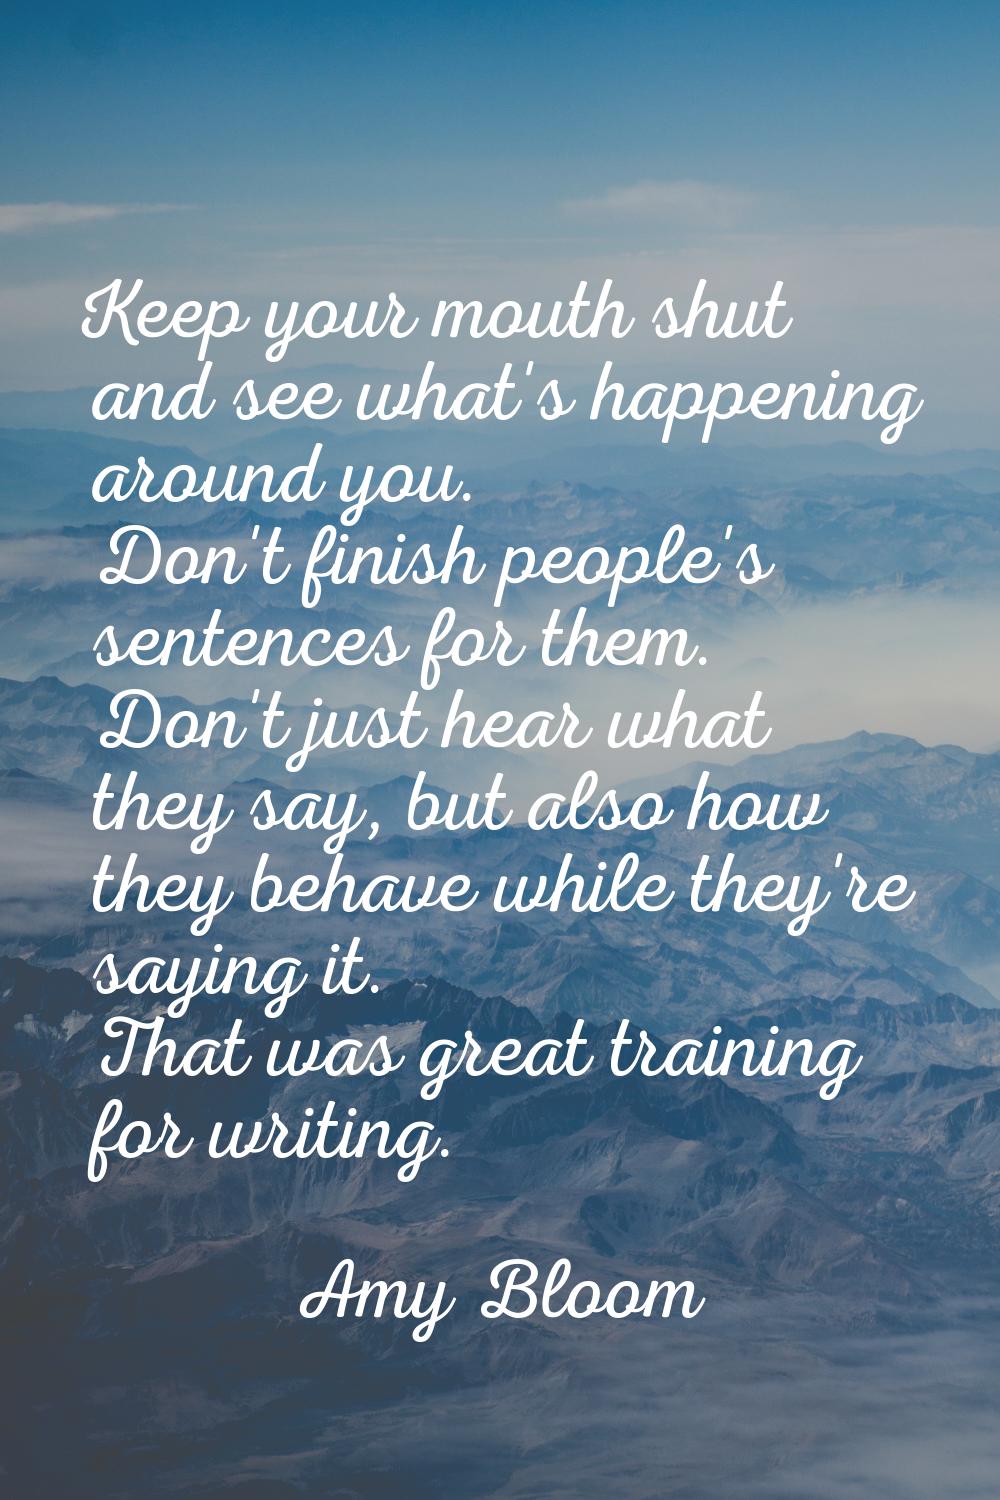 Keep your mouth shut and see what's happening around you. Don't finish people's sentences for them.